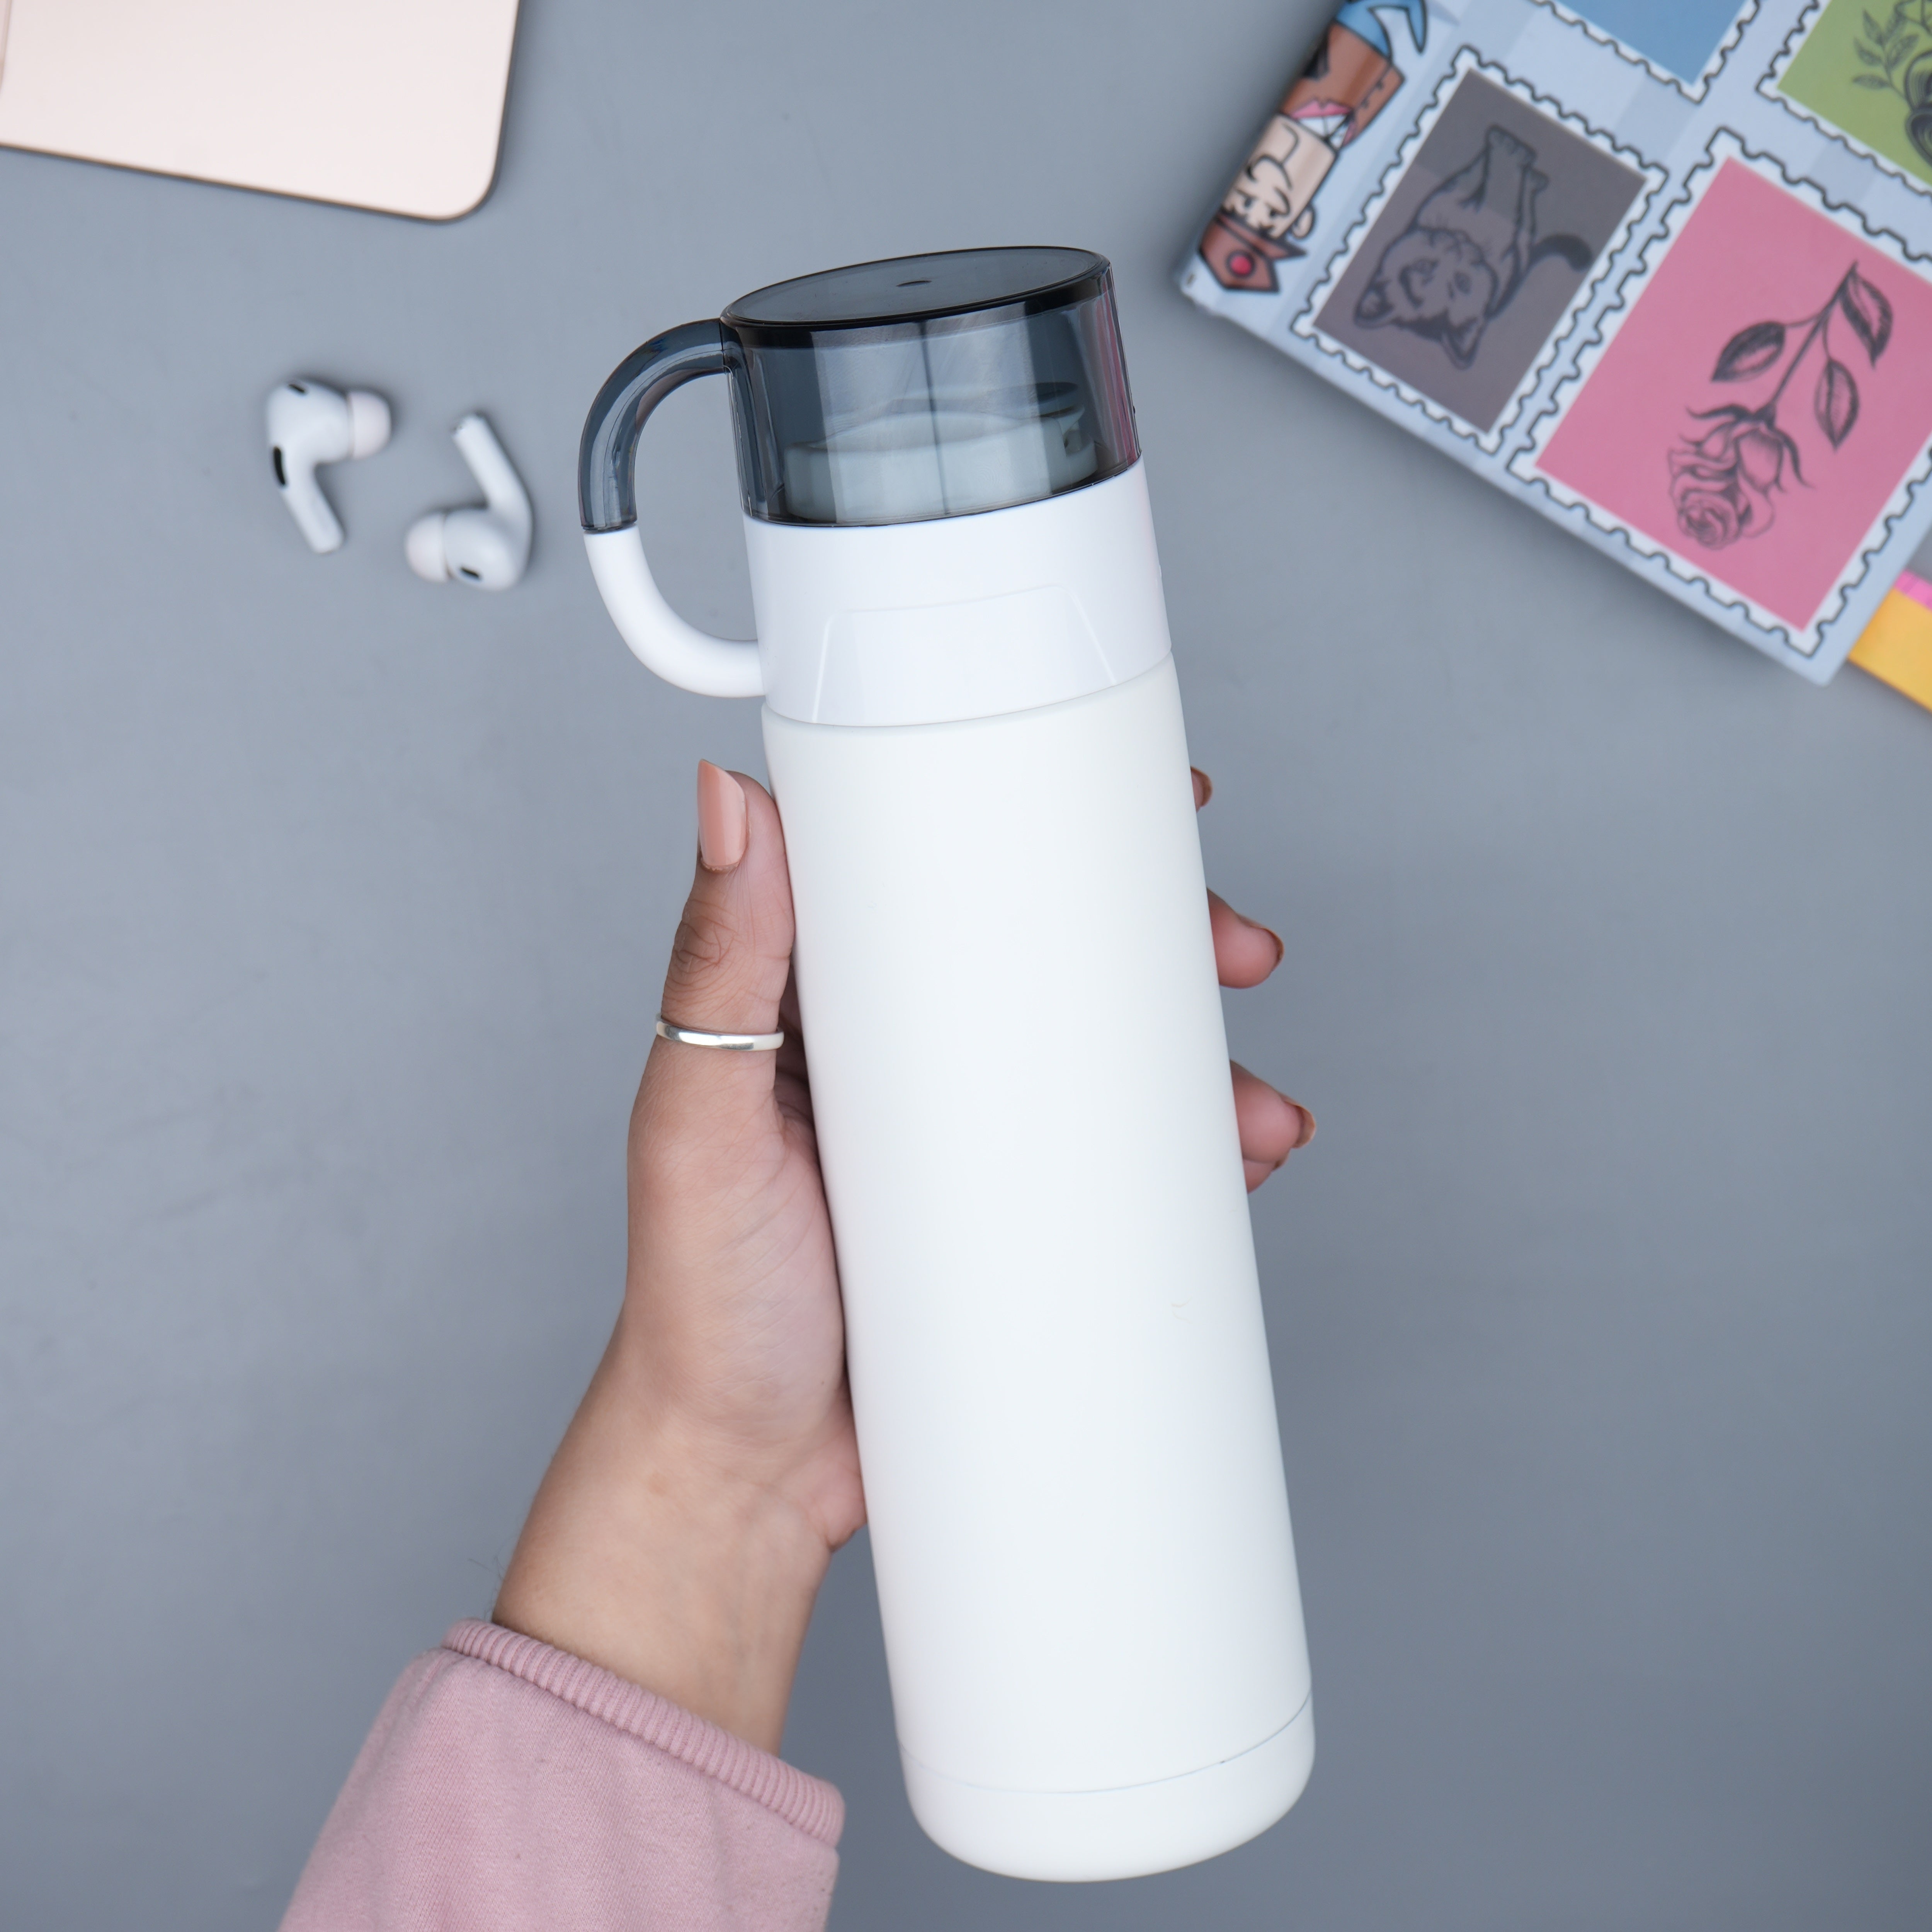 Eleganza Stainless Steel Vacuum Insulated Thermos Water Bottle With Cup